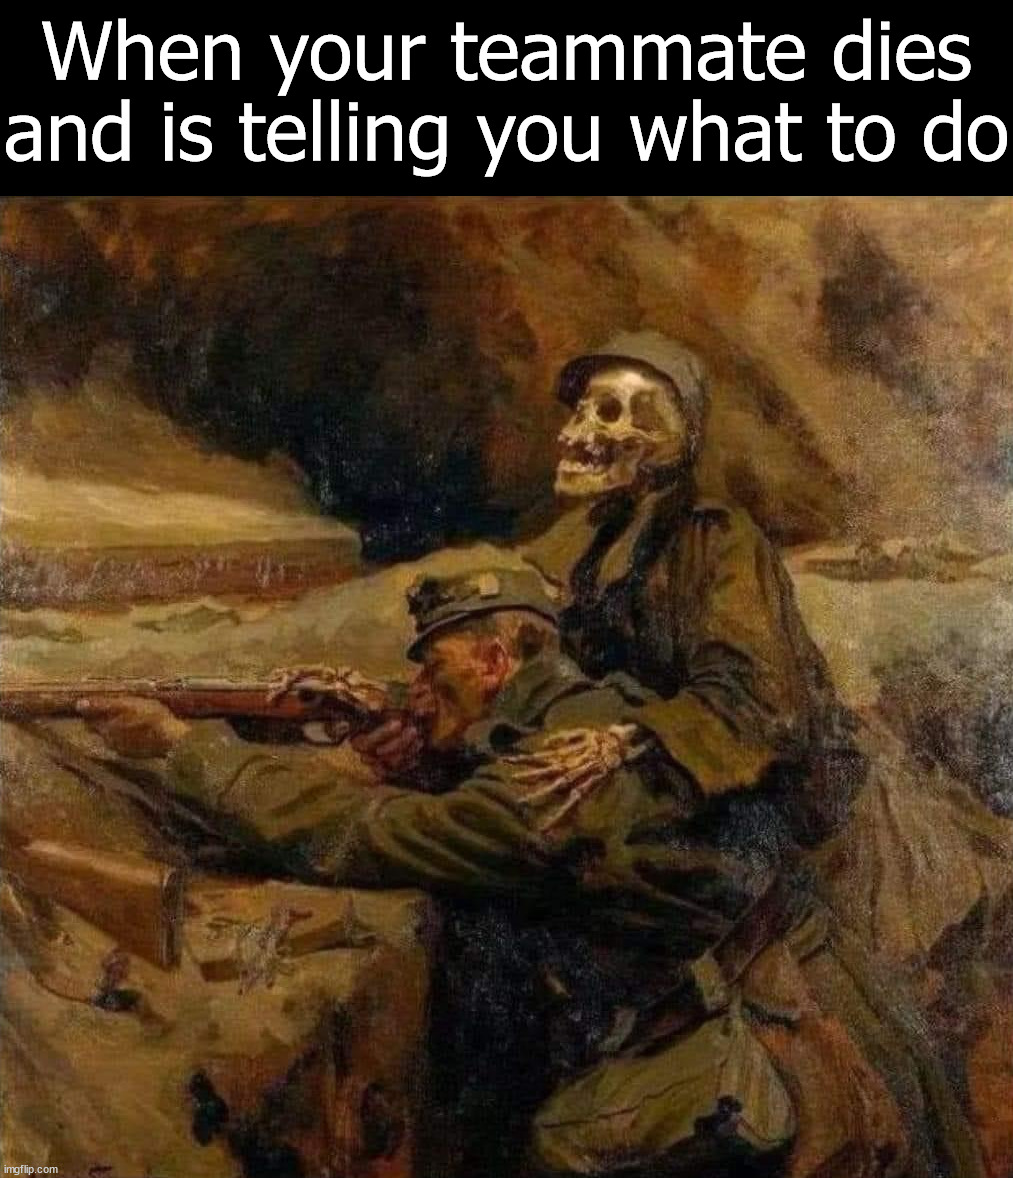 Yelling in your headphones | When your teammate dies and is telling you what to do | image tagged in gaming,yelling,died | made w/ Imgflip meme maker